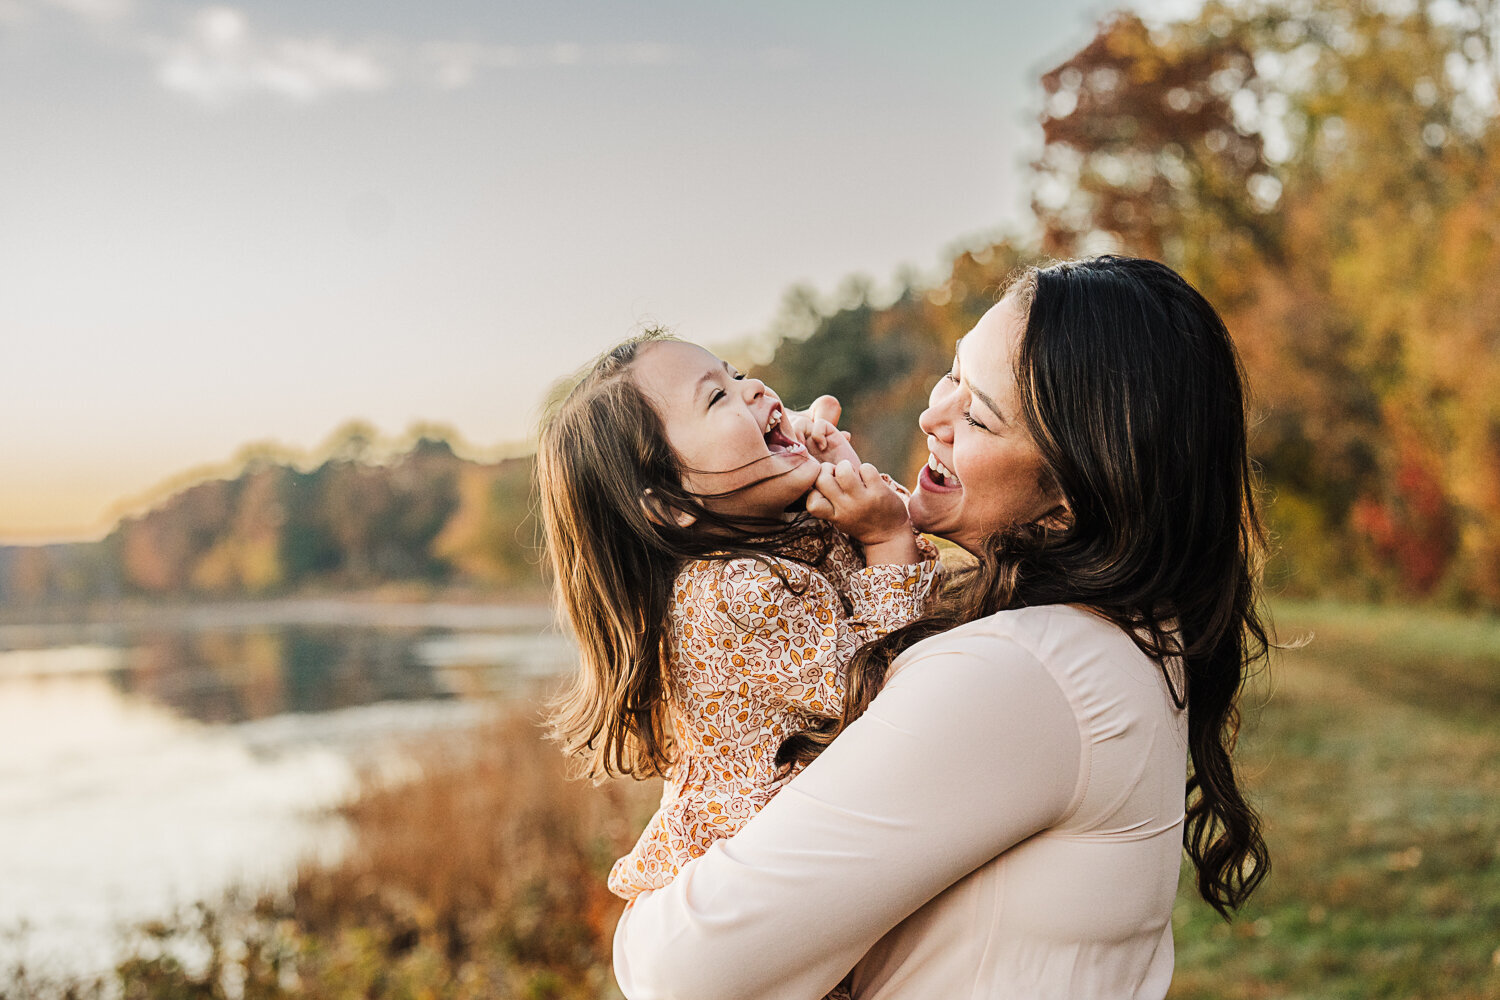 mom holds toddler daughter and both laugh beside a lake at sunrise